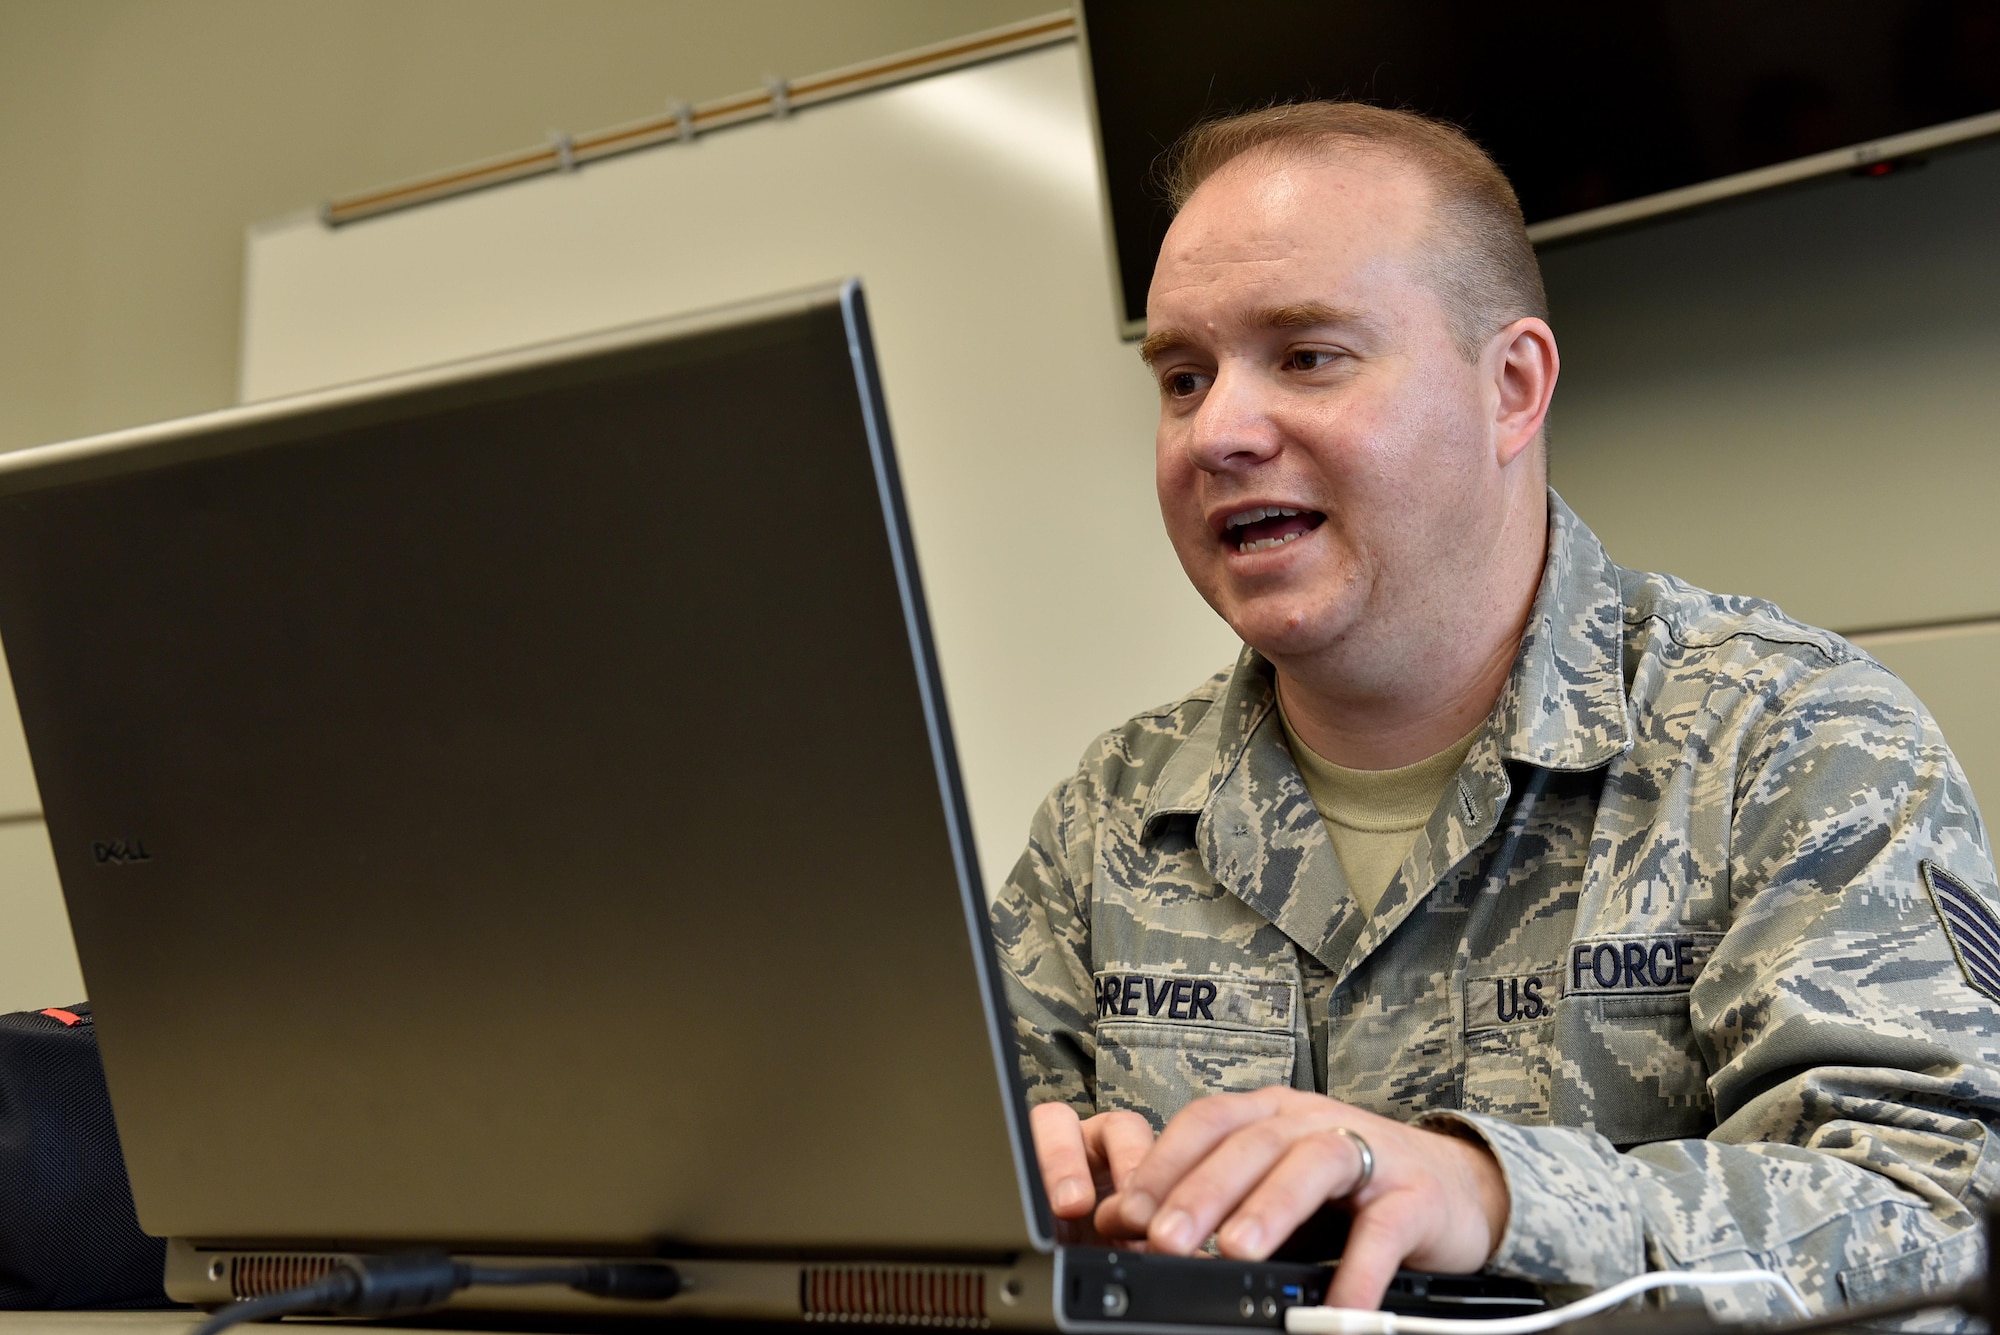 Tech. Sgt. Steve Grever, the public web NCOIC assigned to the Public Web Division at the Air Force Public Affairs Agency, gives instruction to a class Feb. 8, 2017, at the I.G. Brown Training and Education Center in Louisville, Tenn. Around 100 public affairs Airmen and website experts were on campus this week for an Air National Guard workshop on the Armed Forces Public Information Management System. (U.S. Air National Guard photo by Master Sgt. Mike R. Smith)